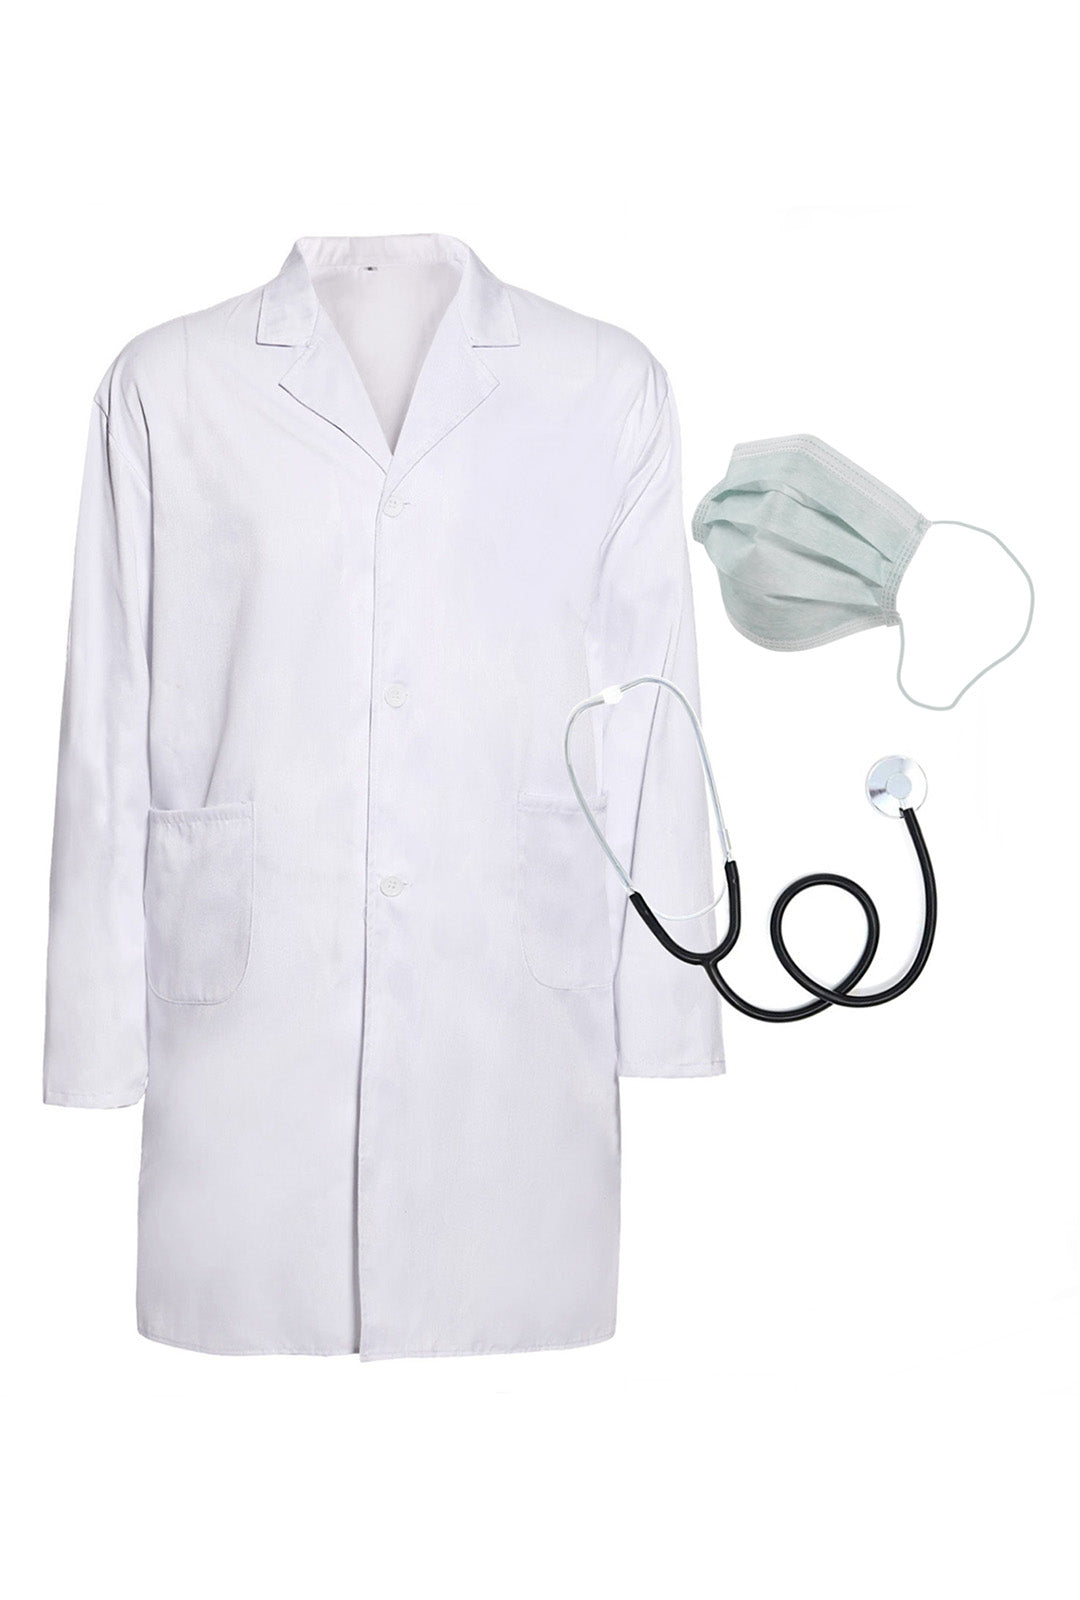 Mad Doctor Lab Coat & Accessories Kit